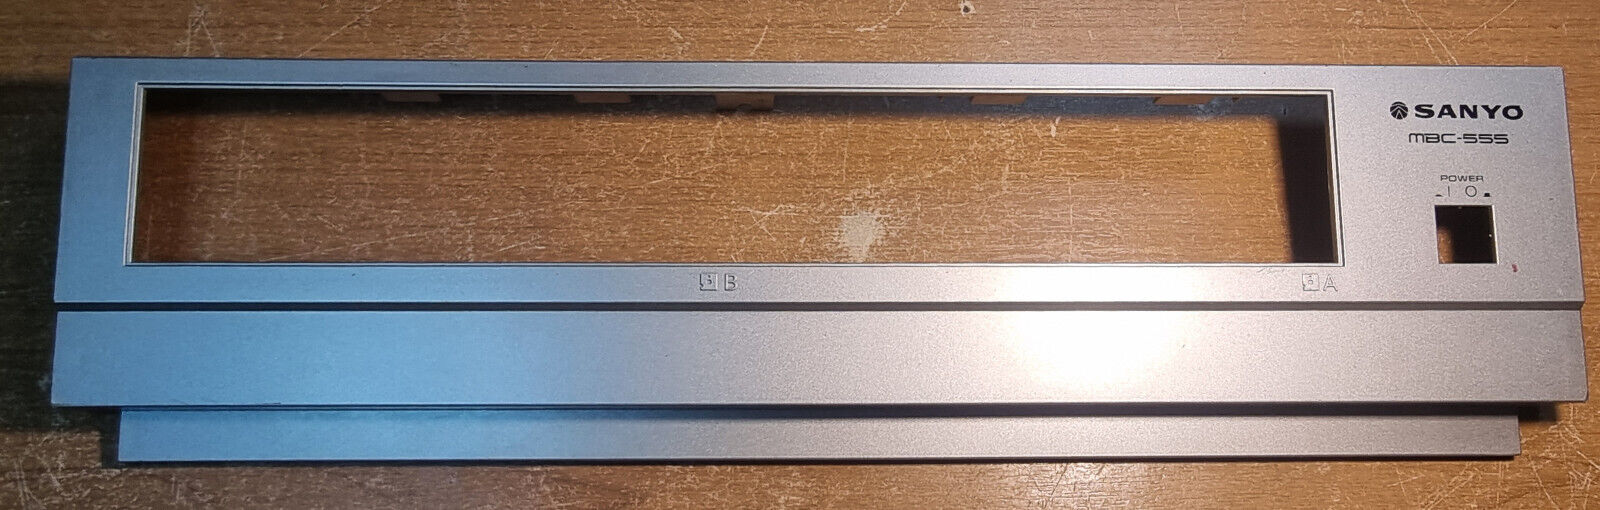 Sanyo MBC-555 Front Plate